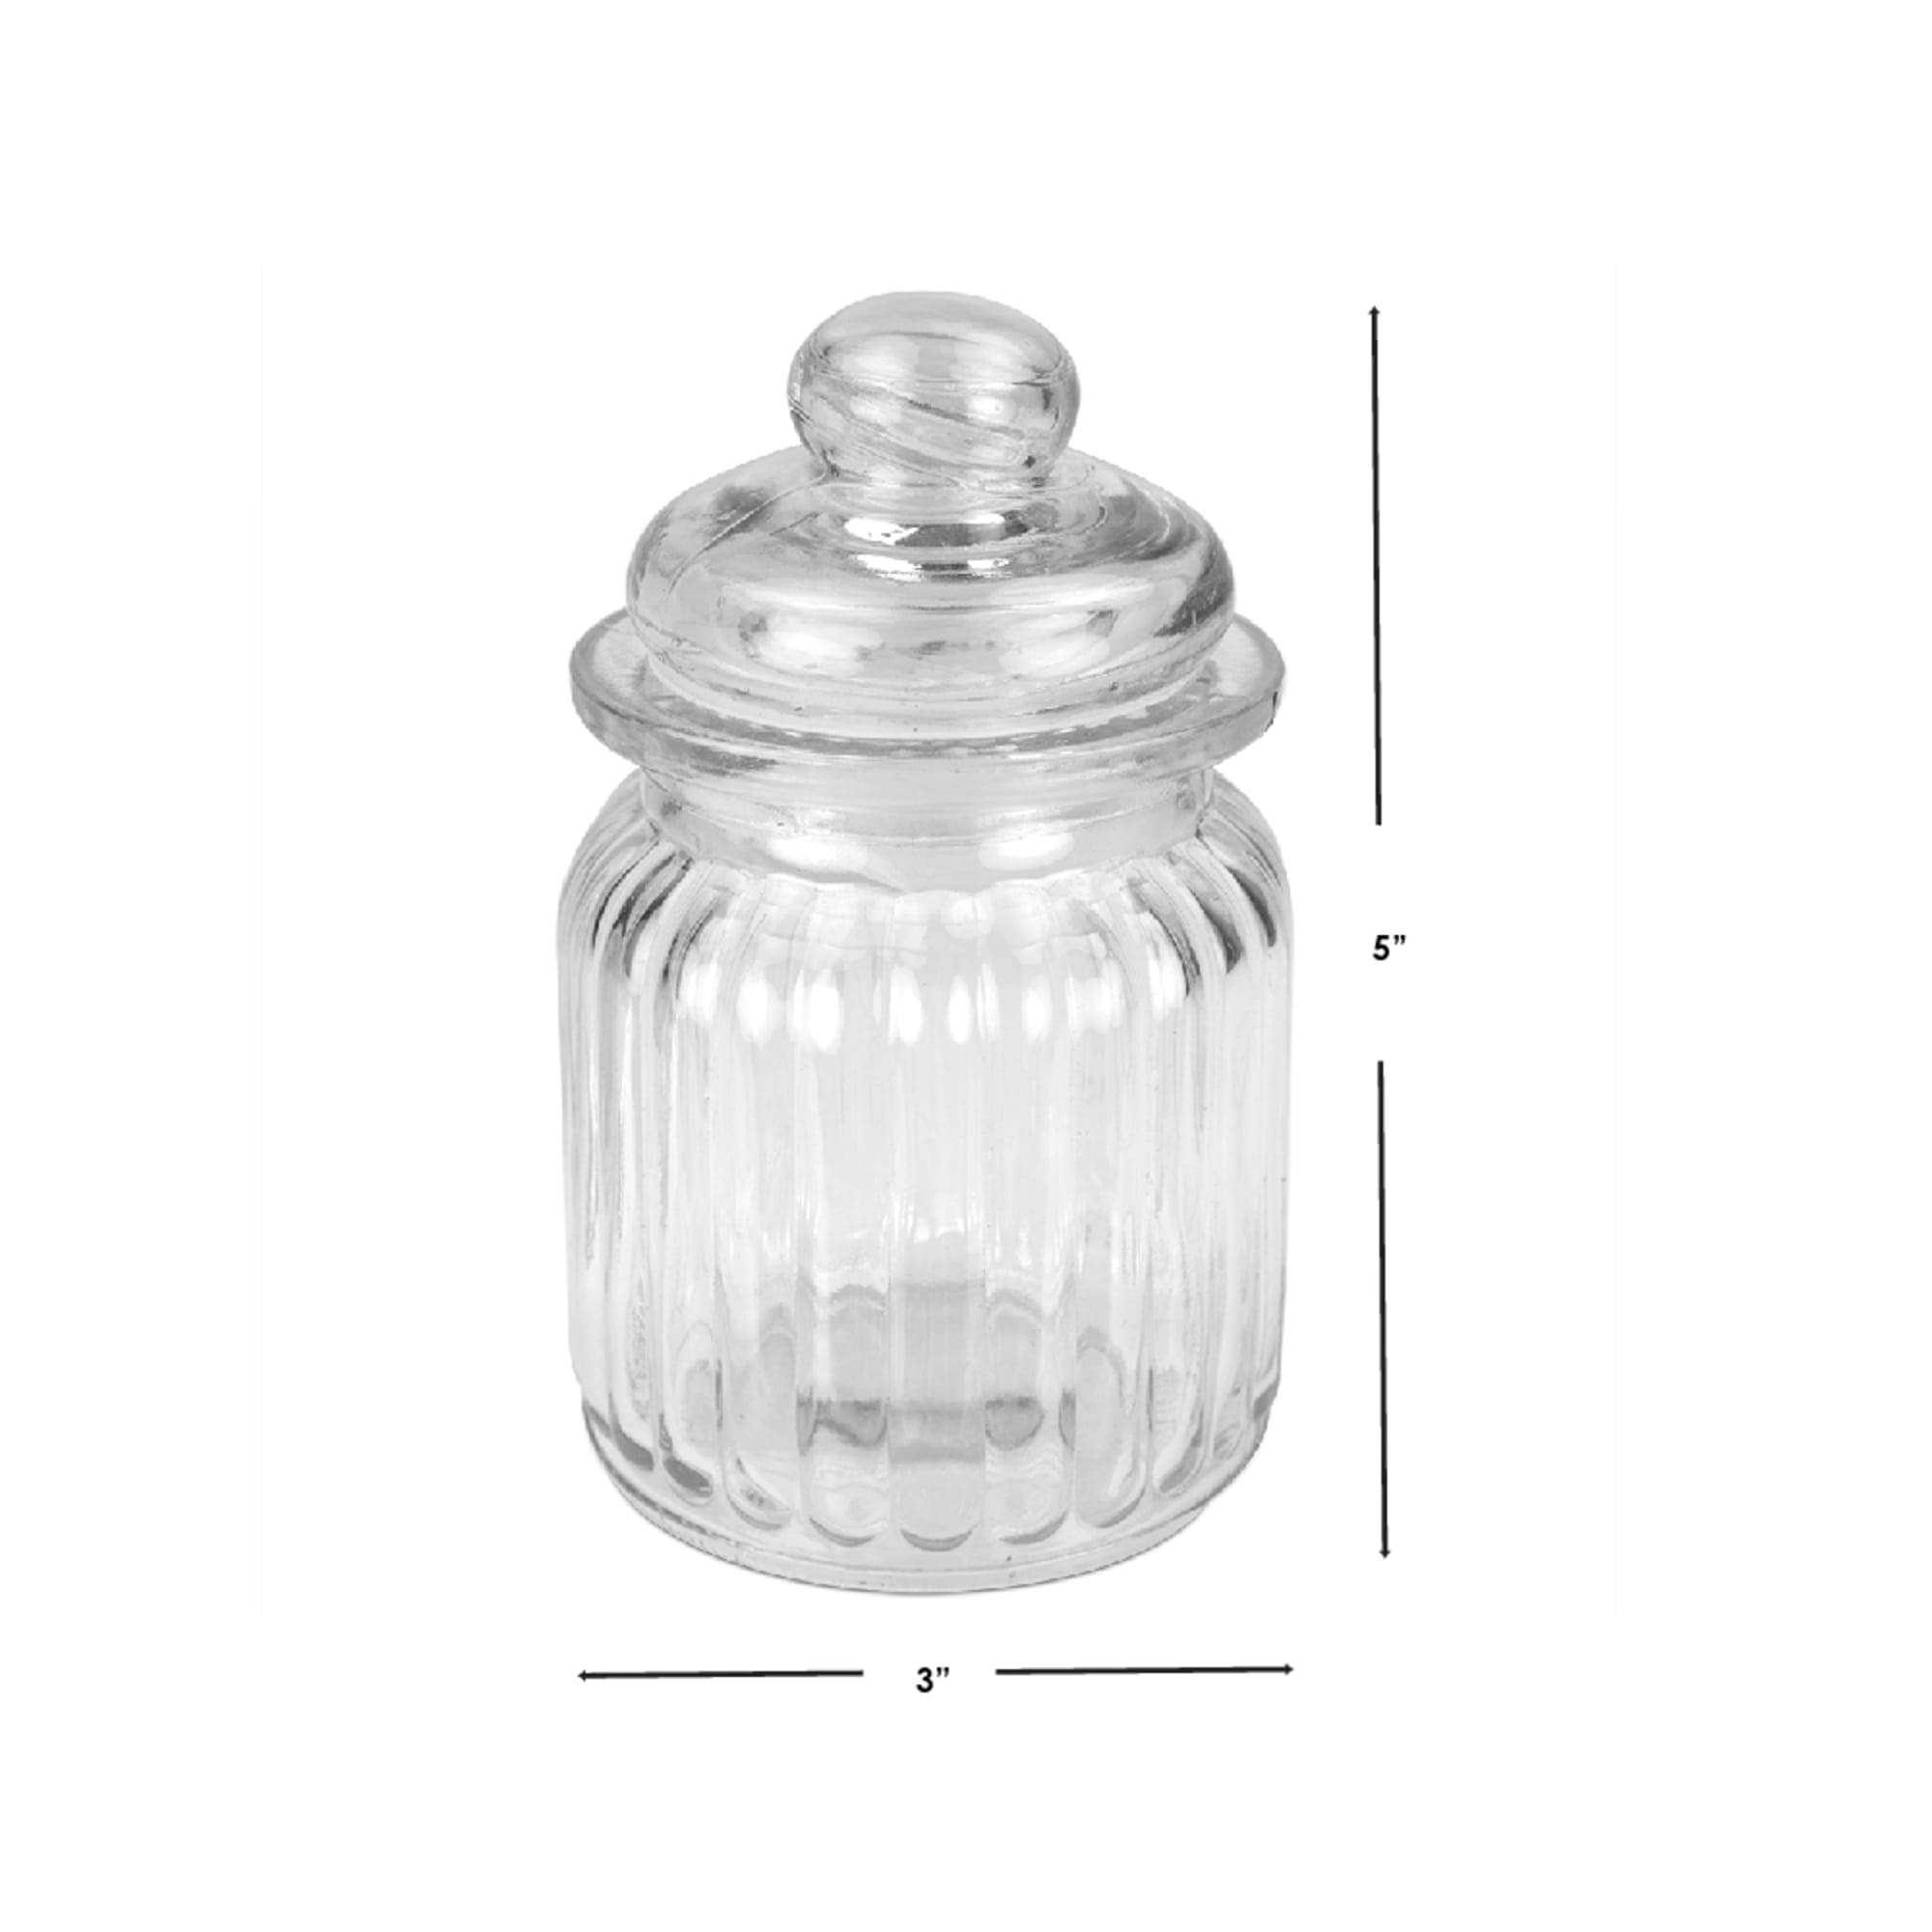 Home Basics Multi-Purpose 8 oz. Rippled Glass Mini Pantry Storage Jar with Dome Lid, Clear $1.50 EACH, CASE PACK OF 48